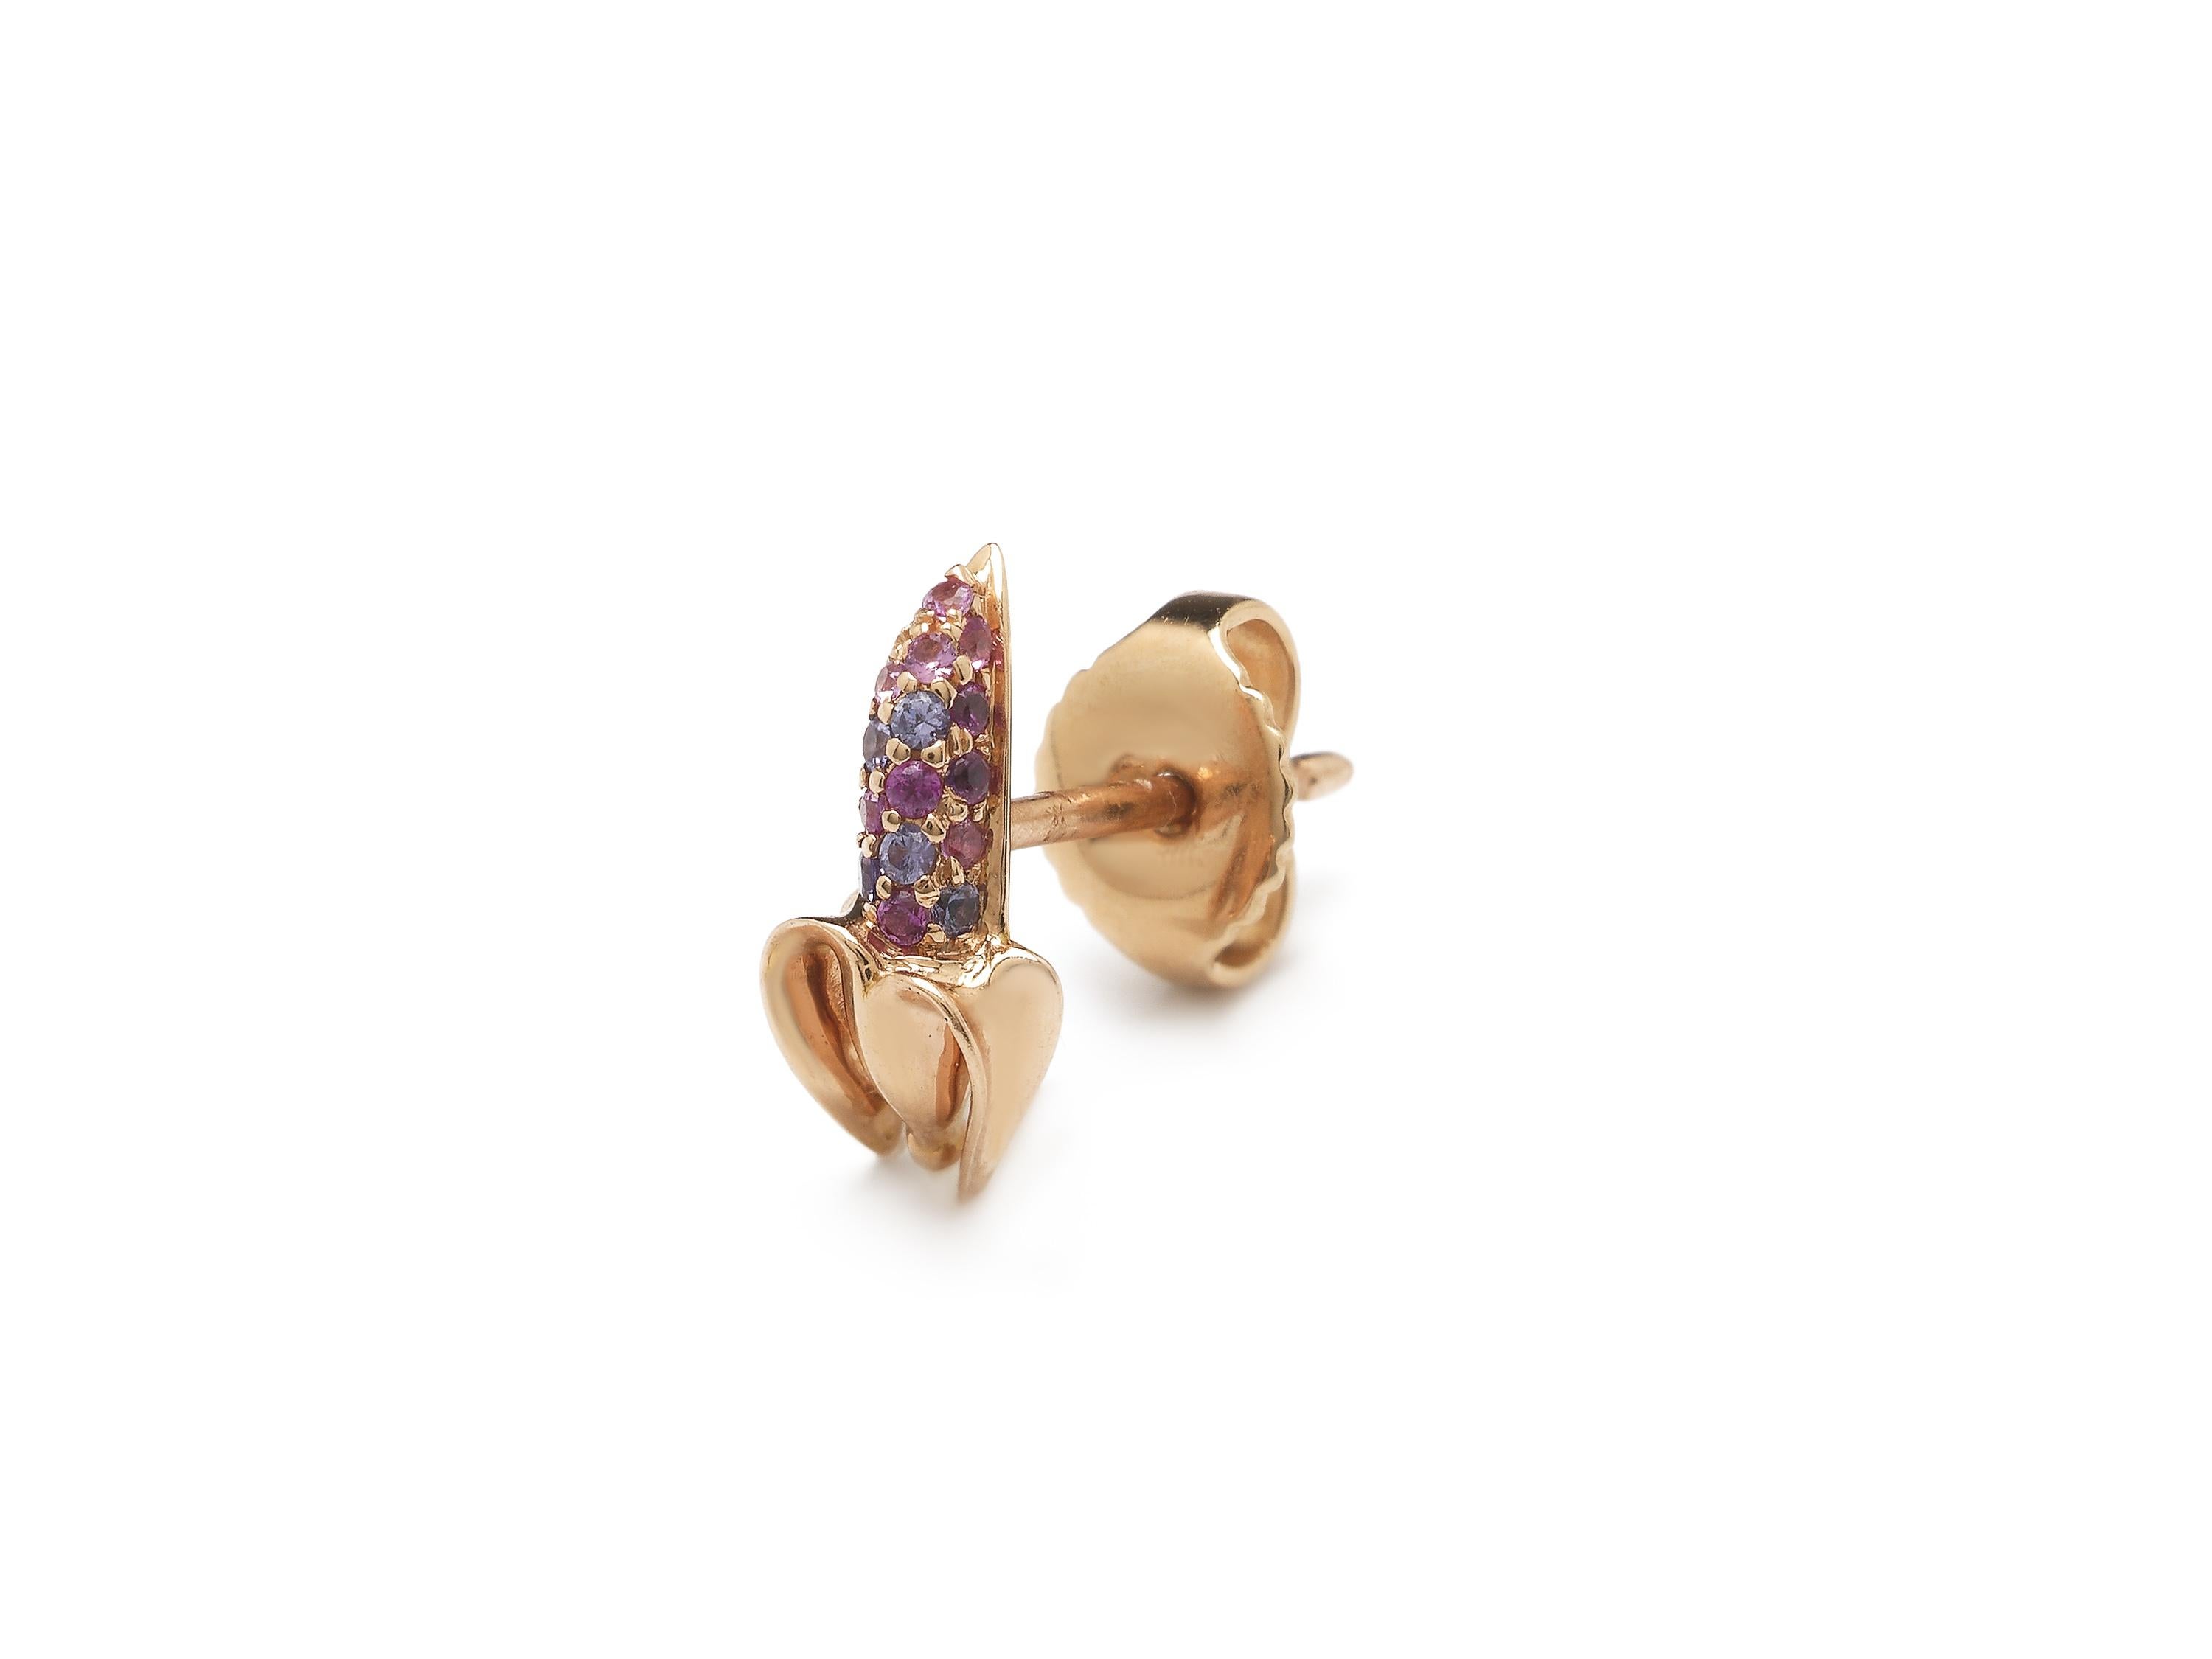 Chic when worn alone, or statement-making when combined with multiple studs on the lobe, the Mini Banana Stud Pink Sapphire is fashioned in 18k rose gold and designed as a peeled banana, with the fruit inside embellished with pink and purple